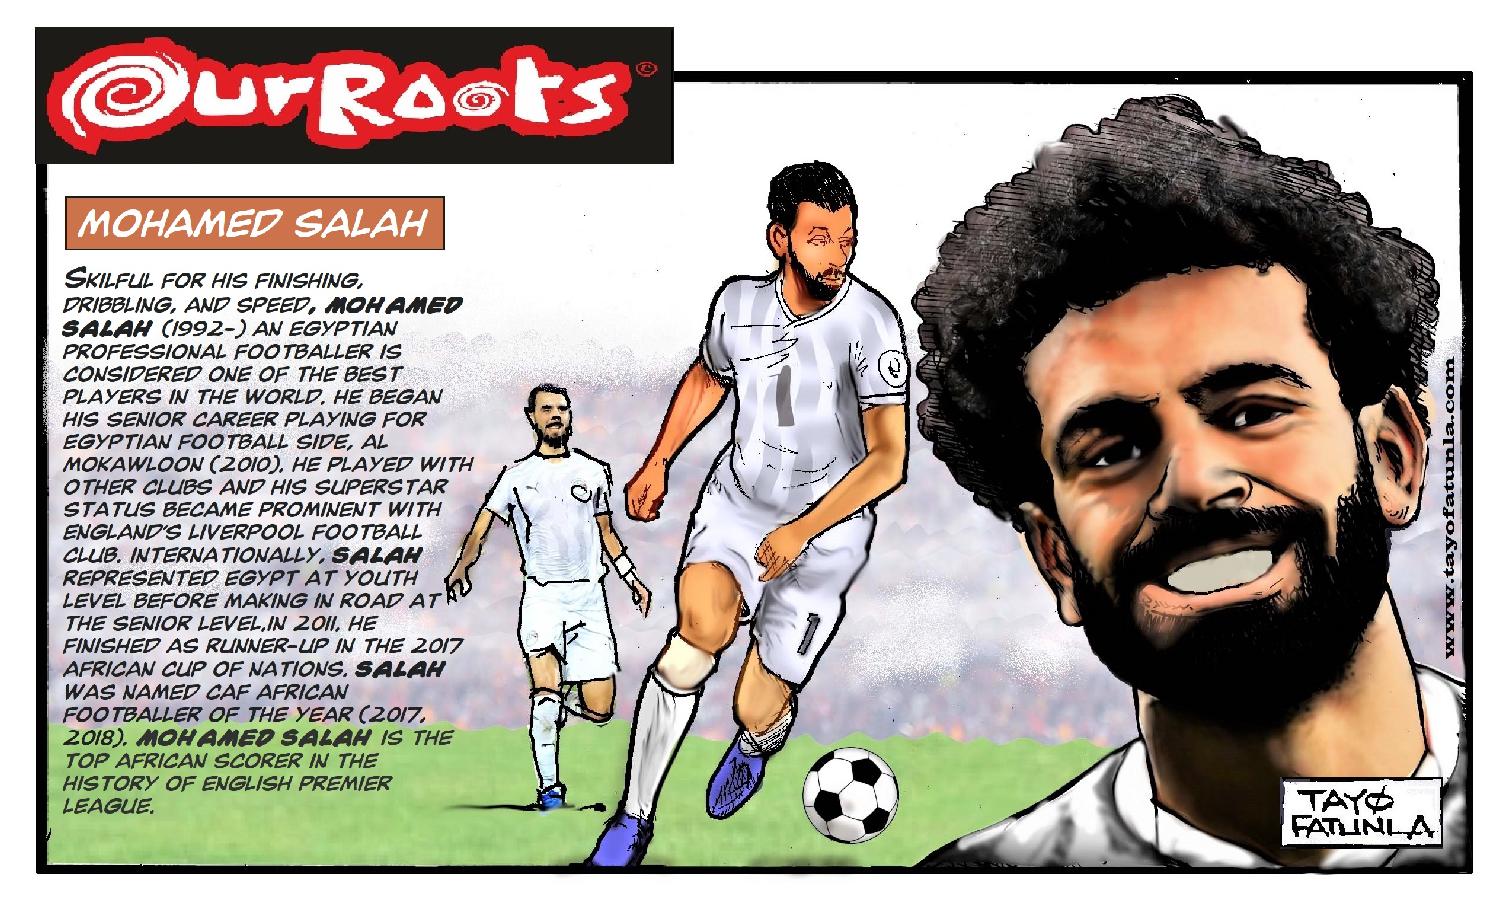 OUR ROOTS - Mohammed Salah